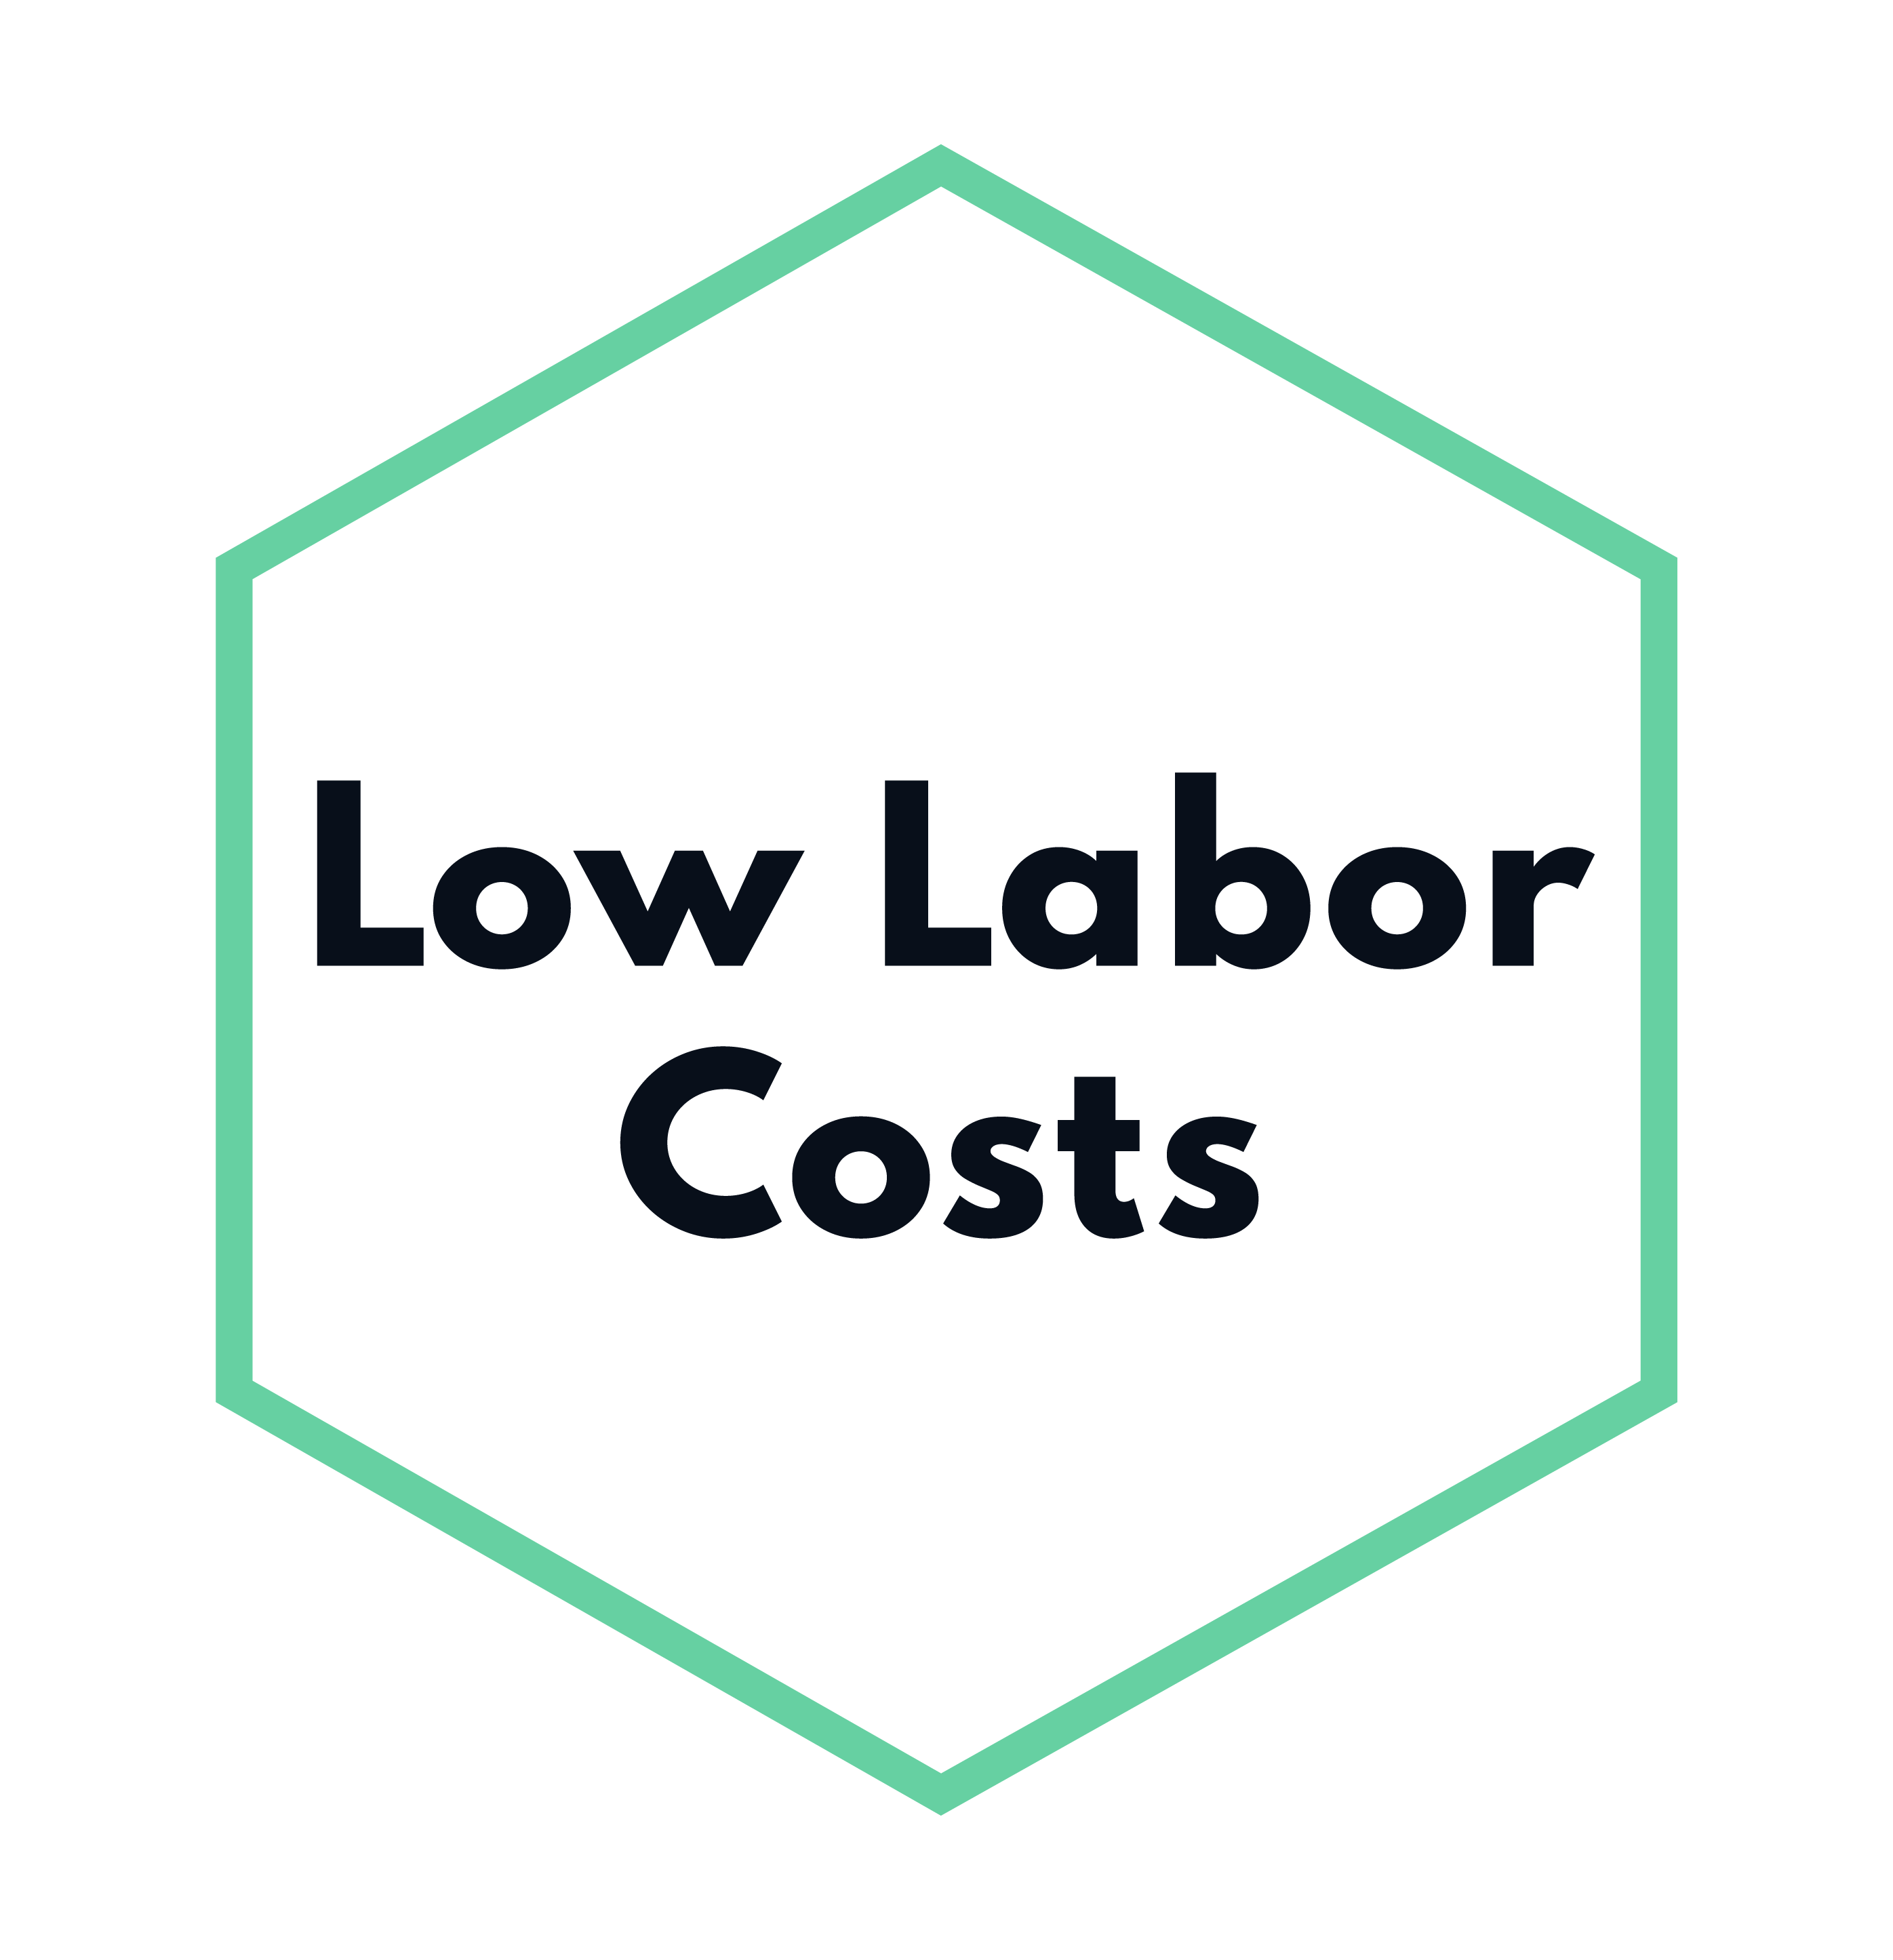 Low Labor Costs